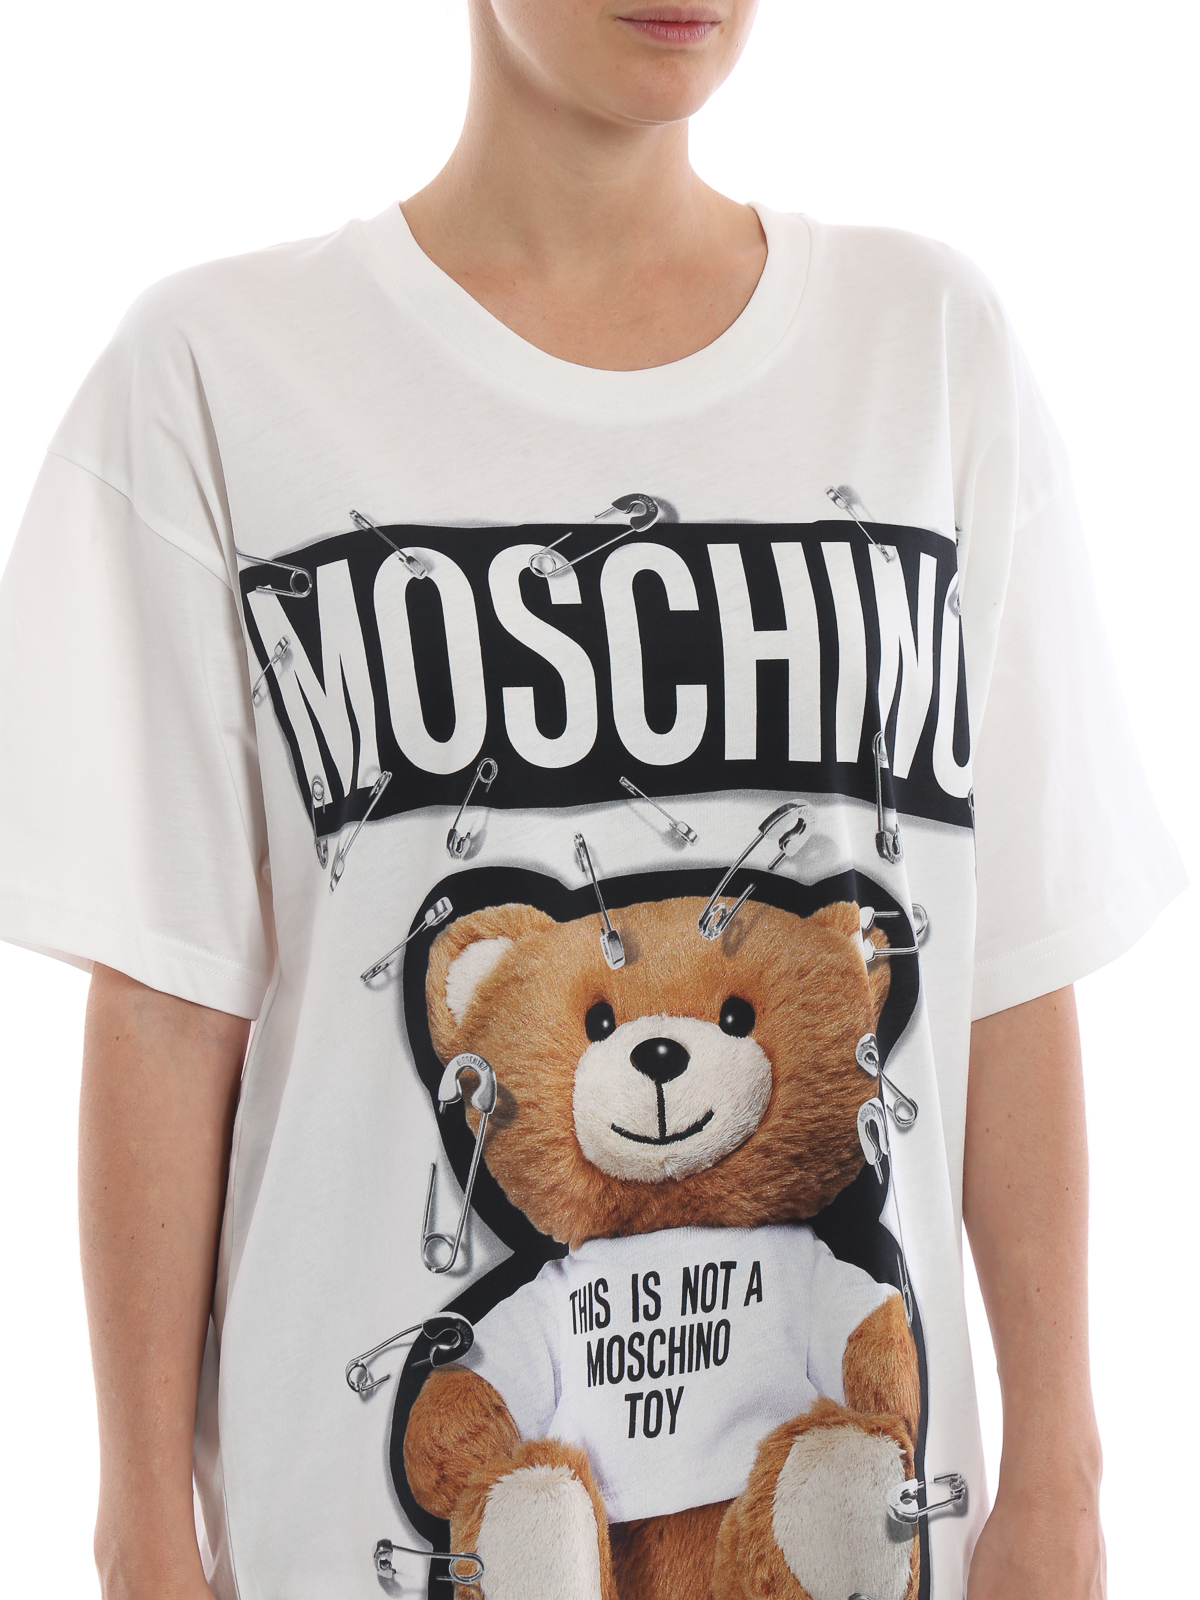 moschino t shirt this is not a moschino toy